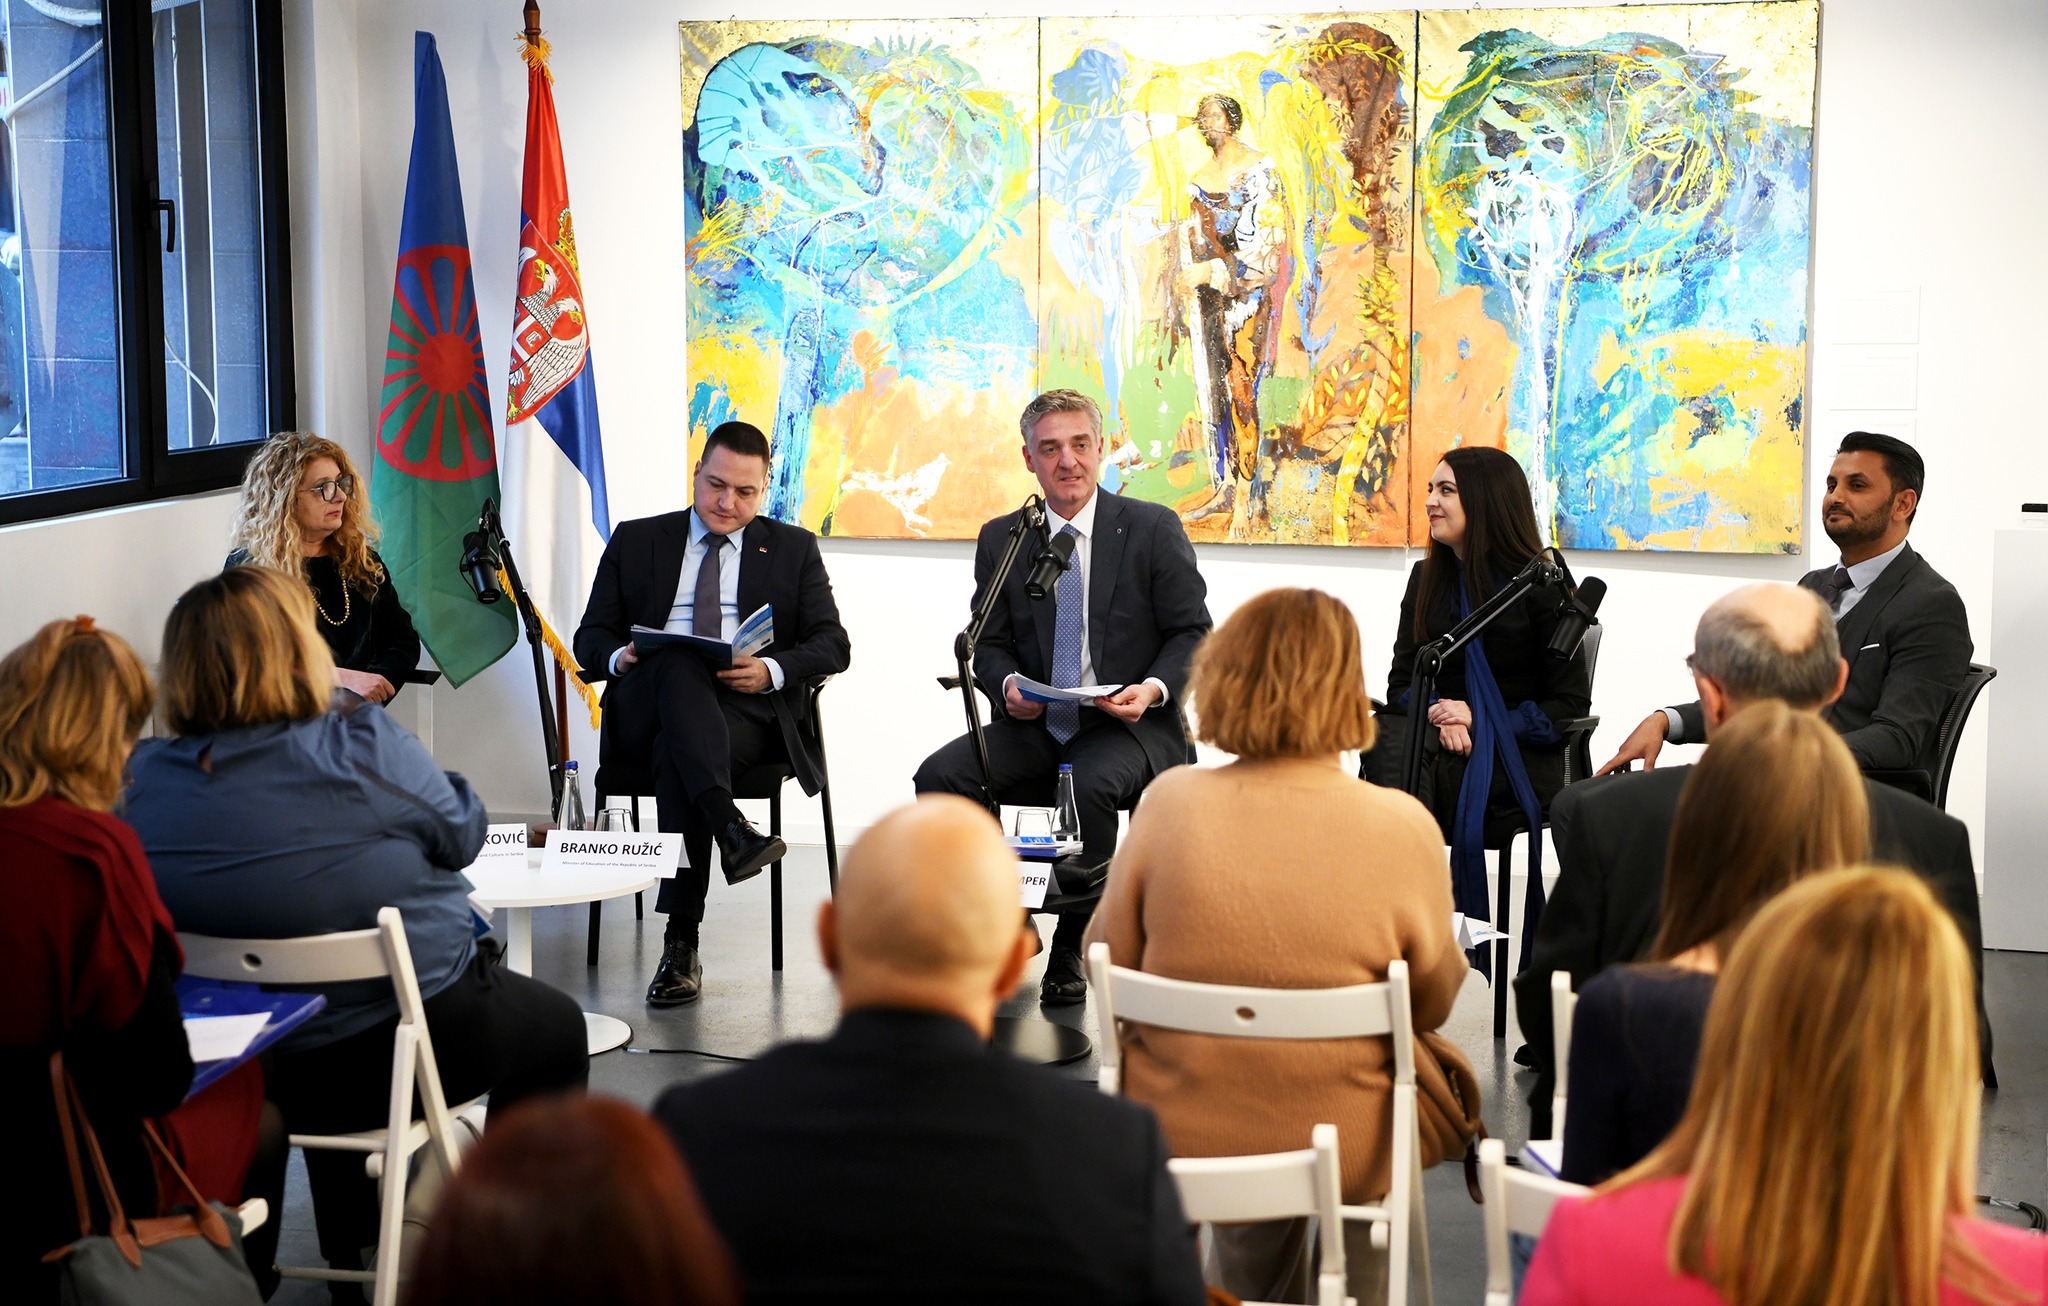 Diplomatic briefing on Roma history teaching